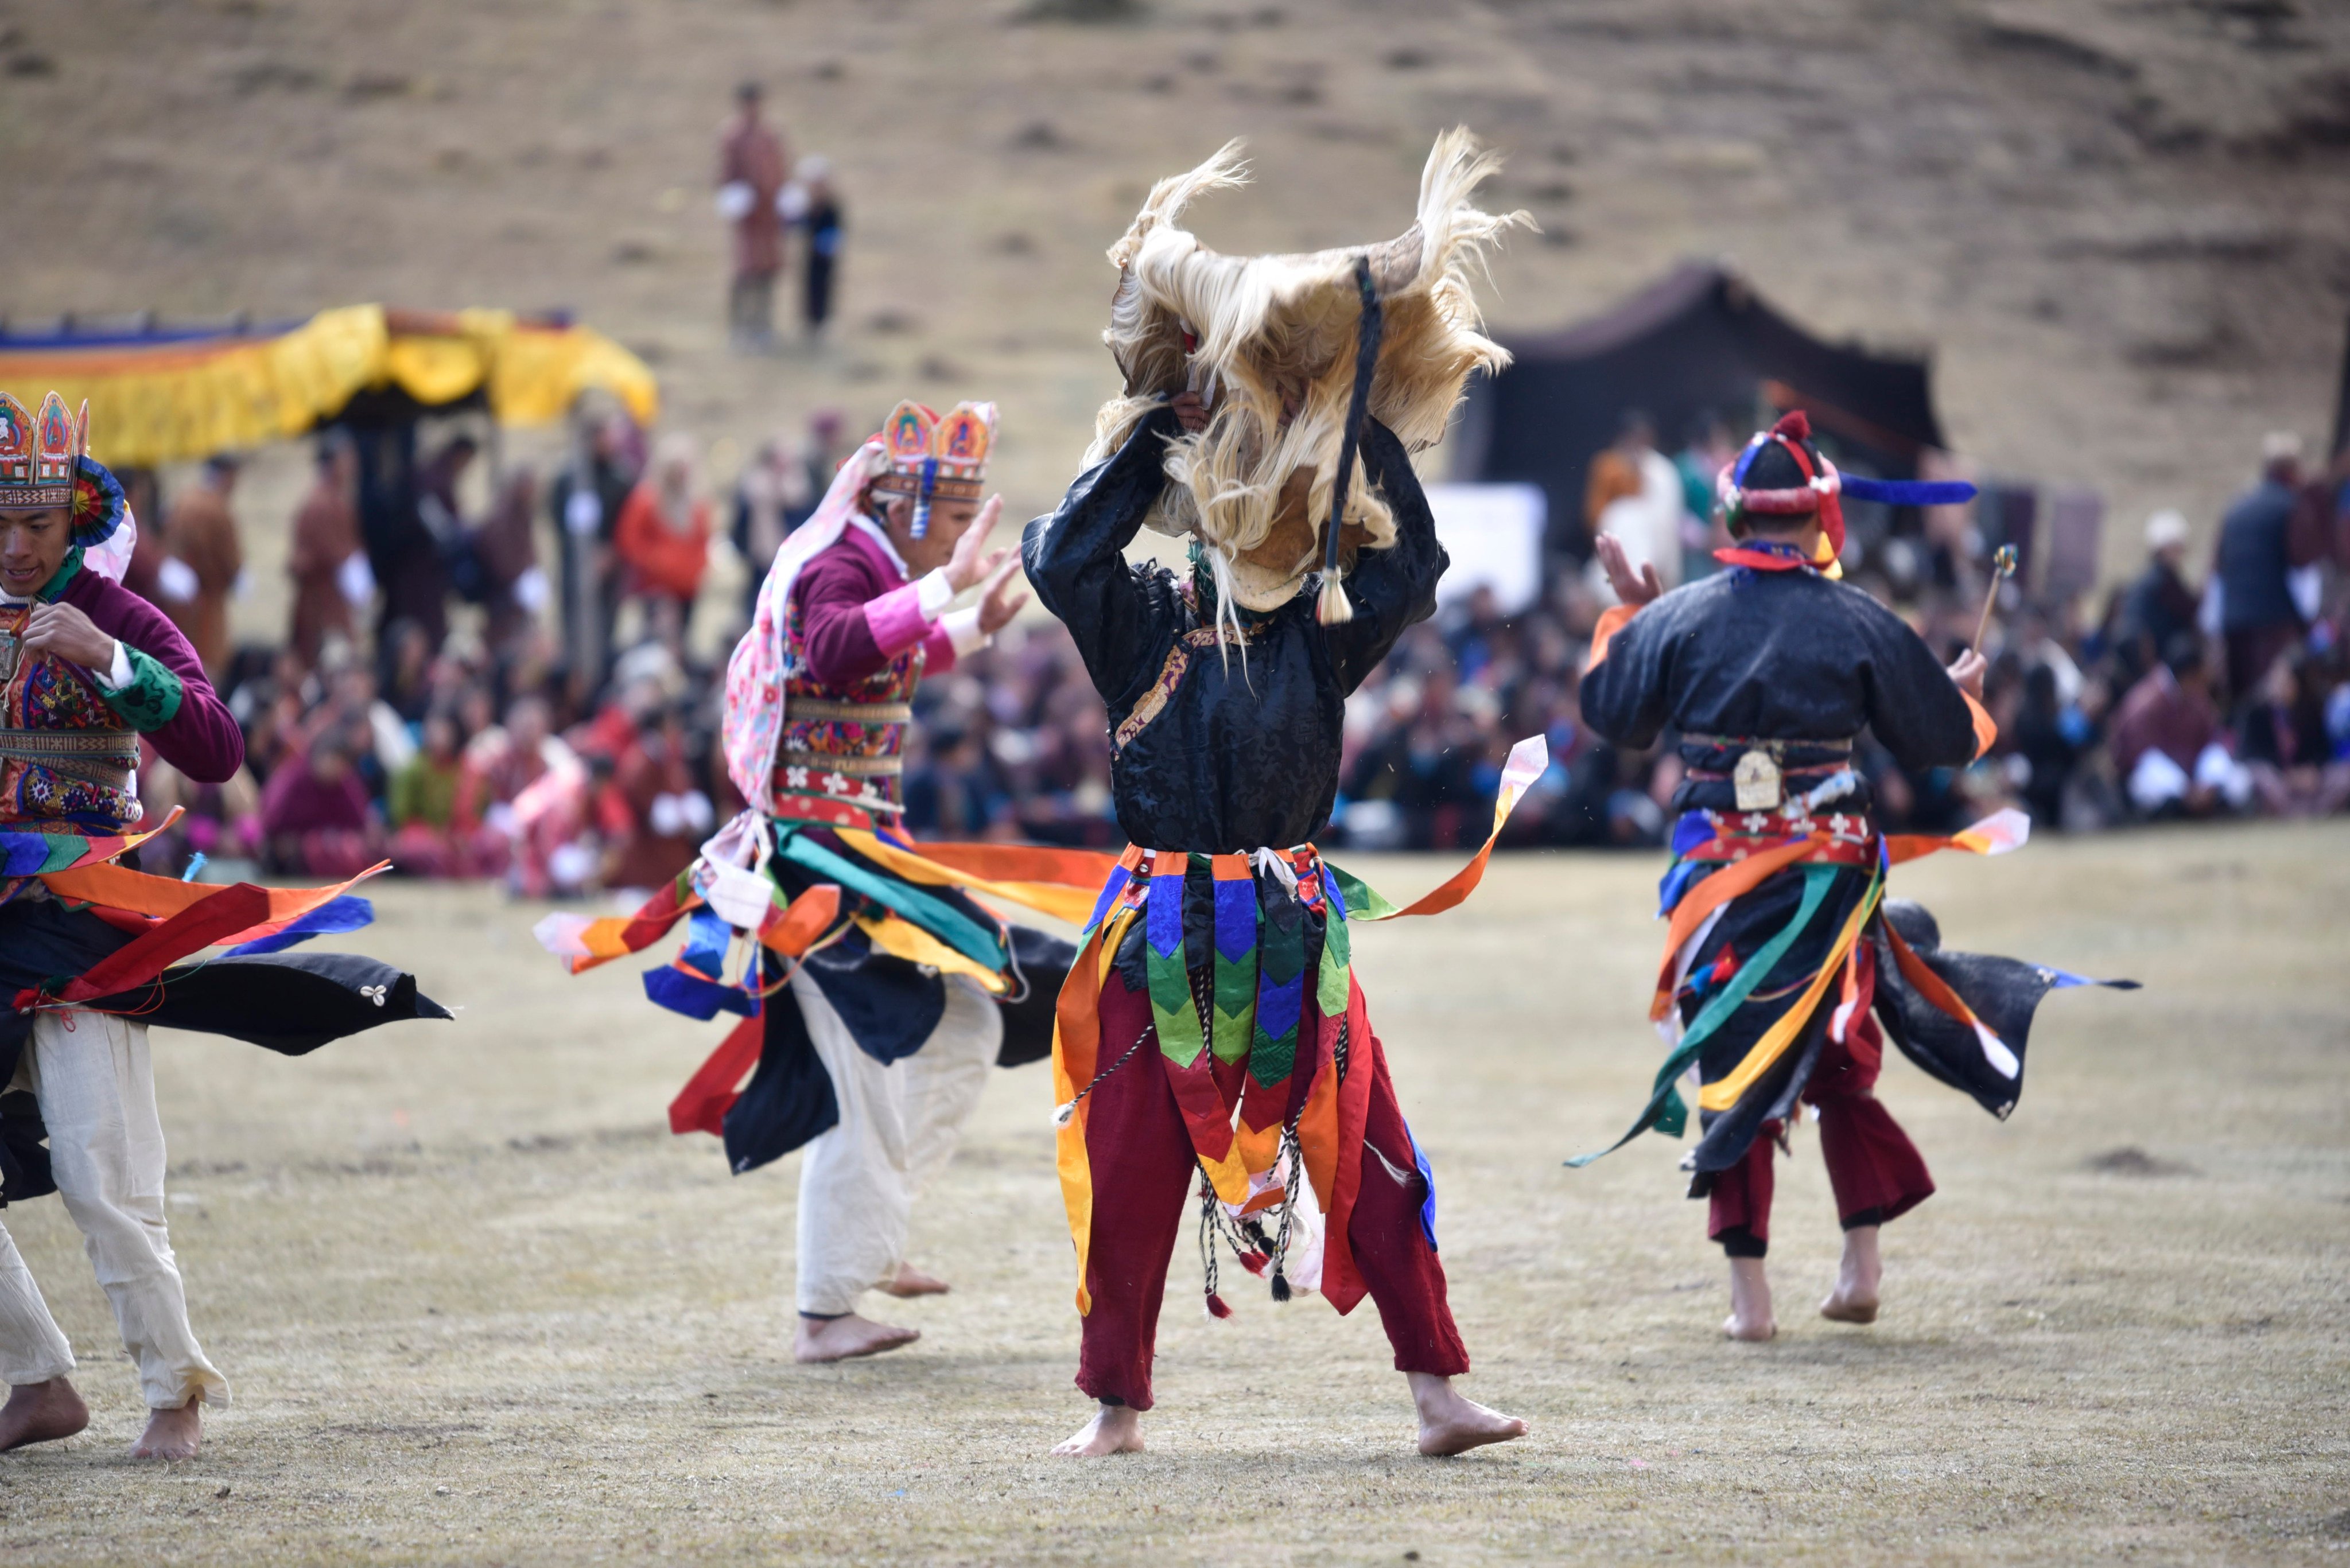 The yak dance is colourful and energetic. Photo: Bassem Nimah